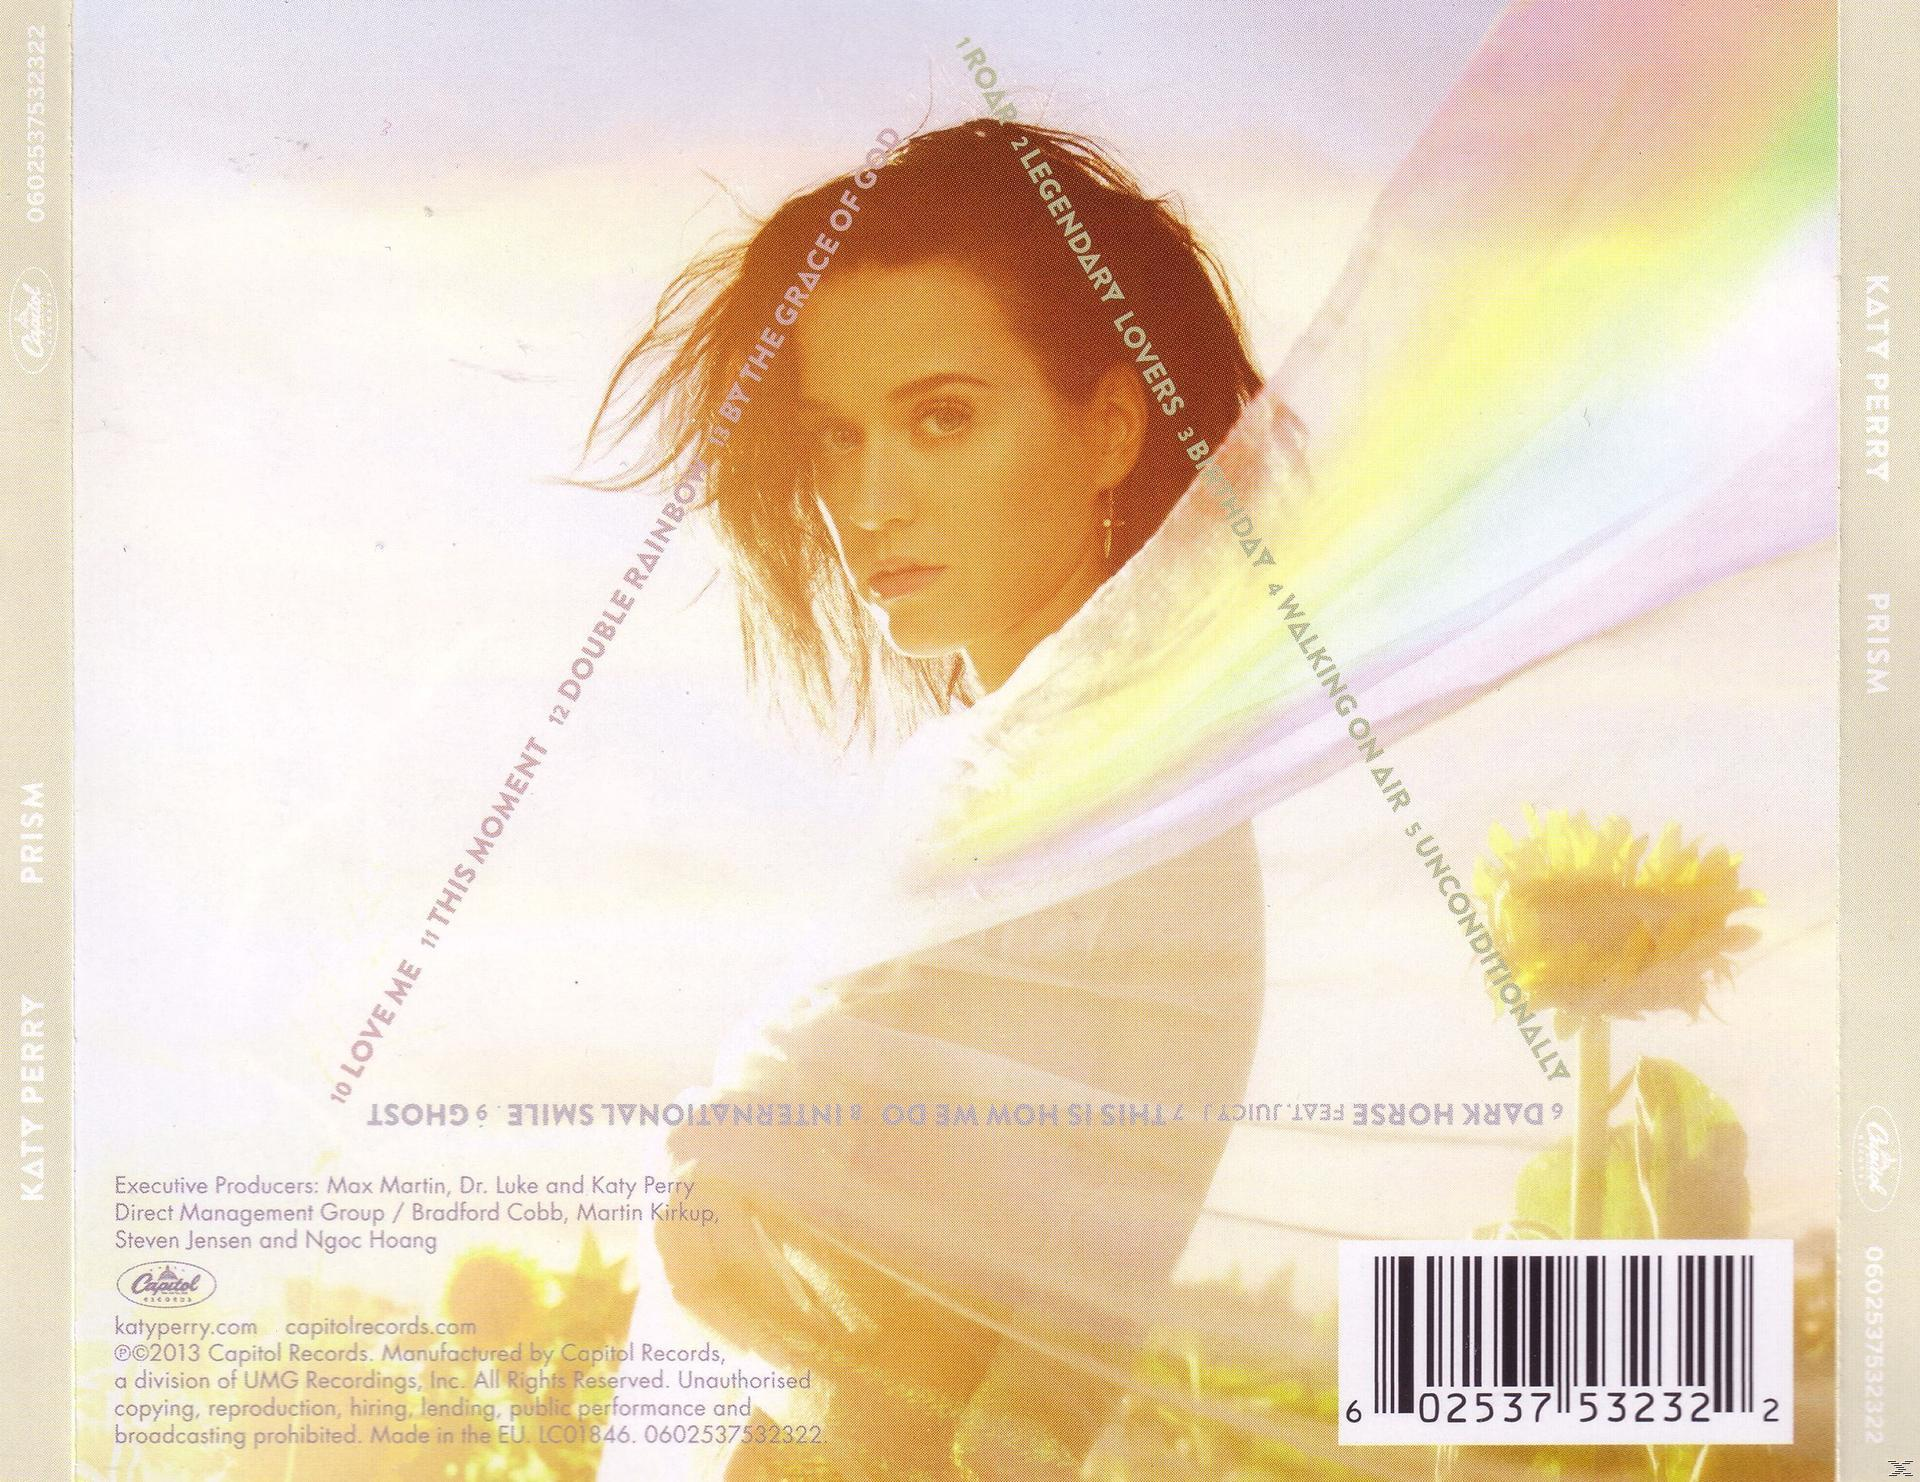 - (CD) Prism Katy - Perry